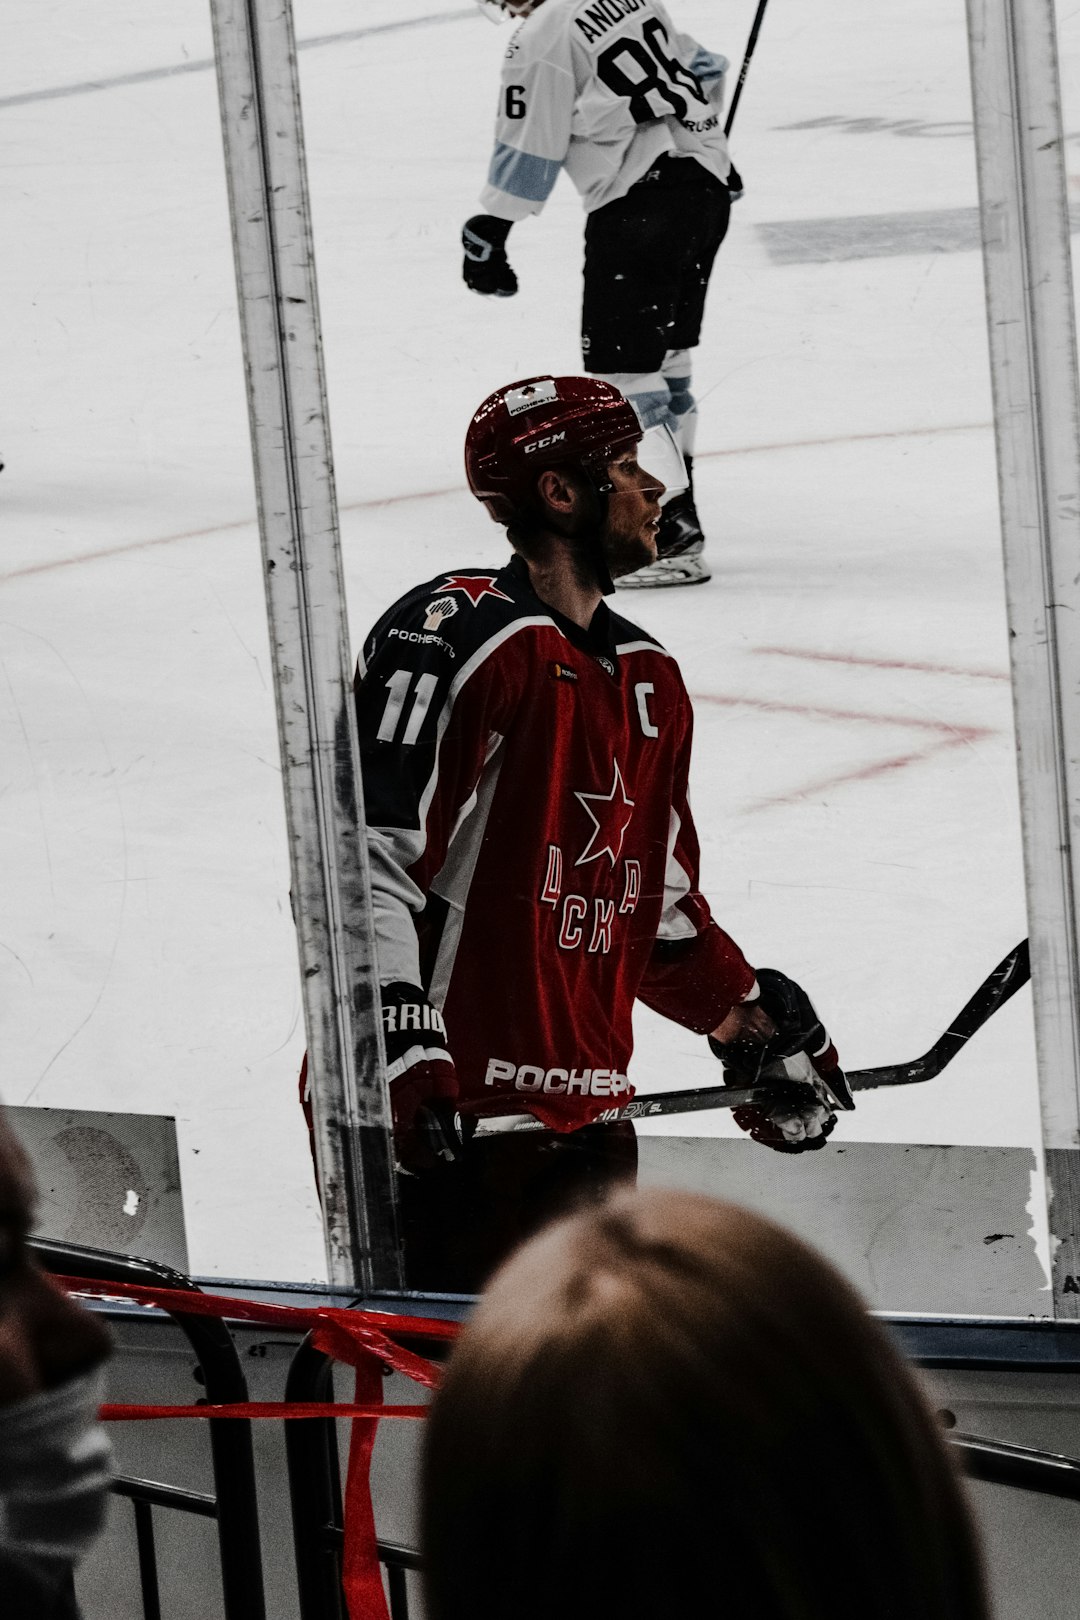 man in red and white jersey shirt playing ice hockey